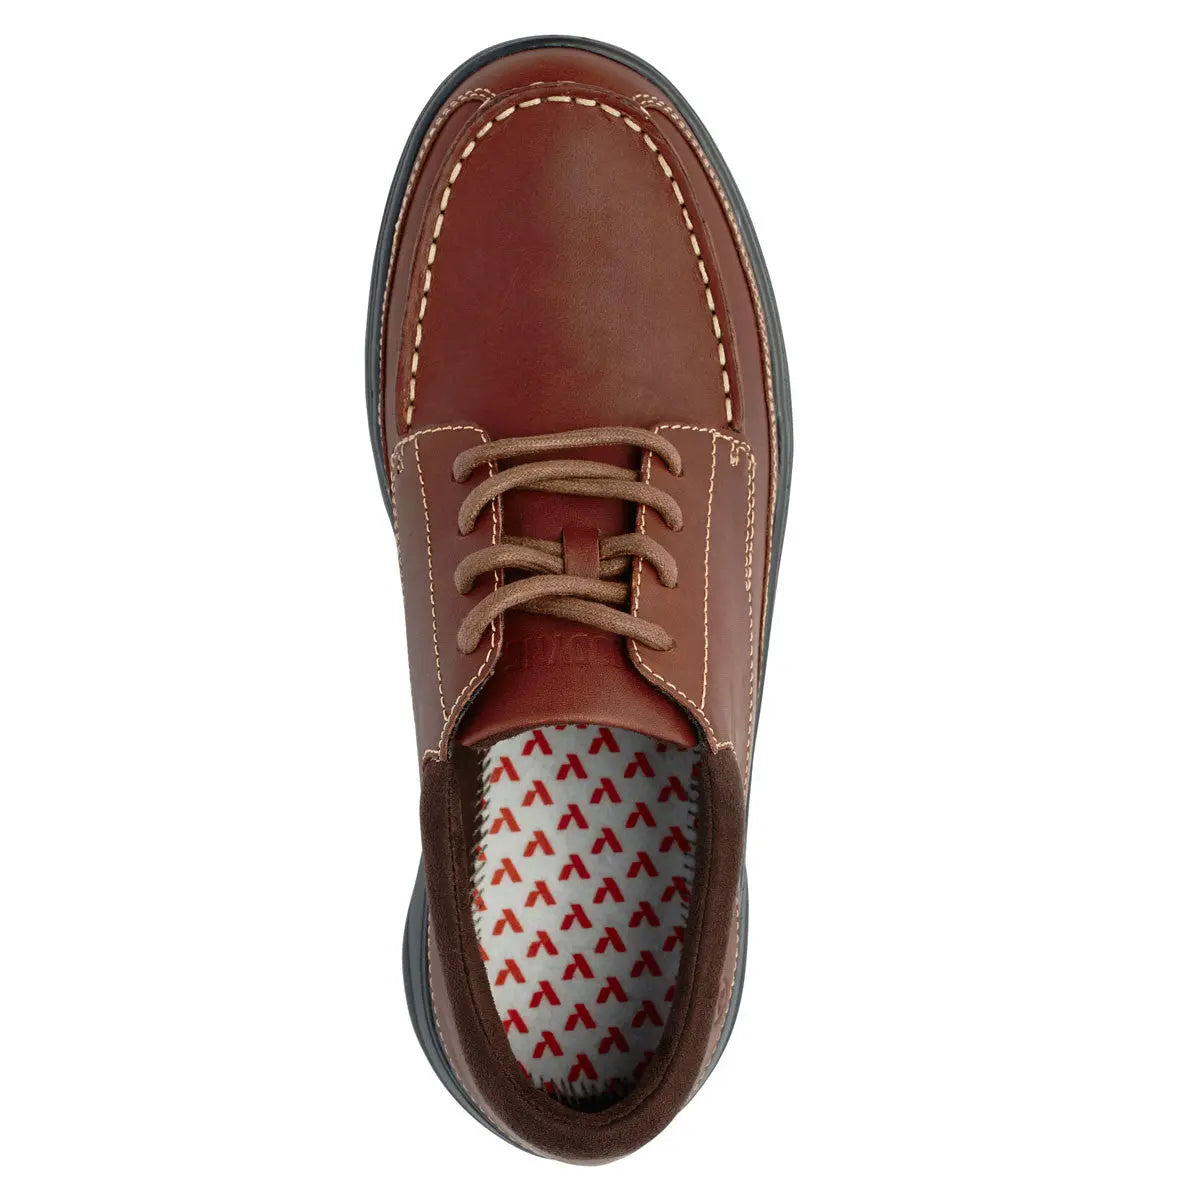 Anodyne Men's No.30 Casual Dress Diabetic Shoe, Whiskey available in three widths